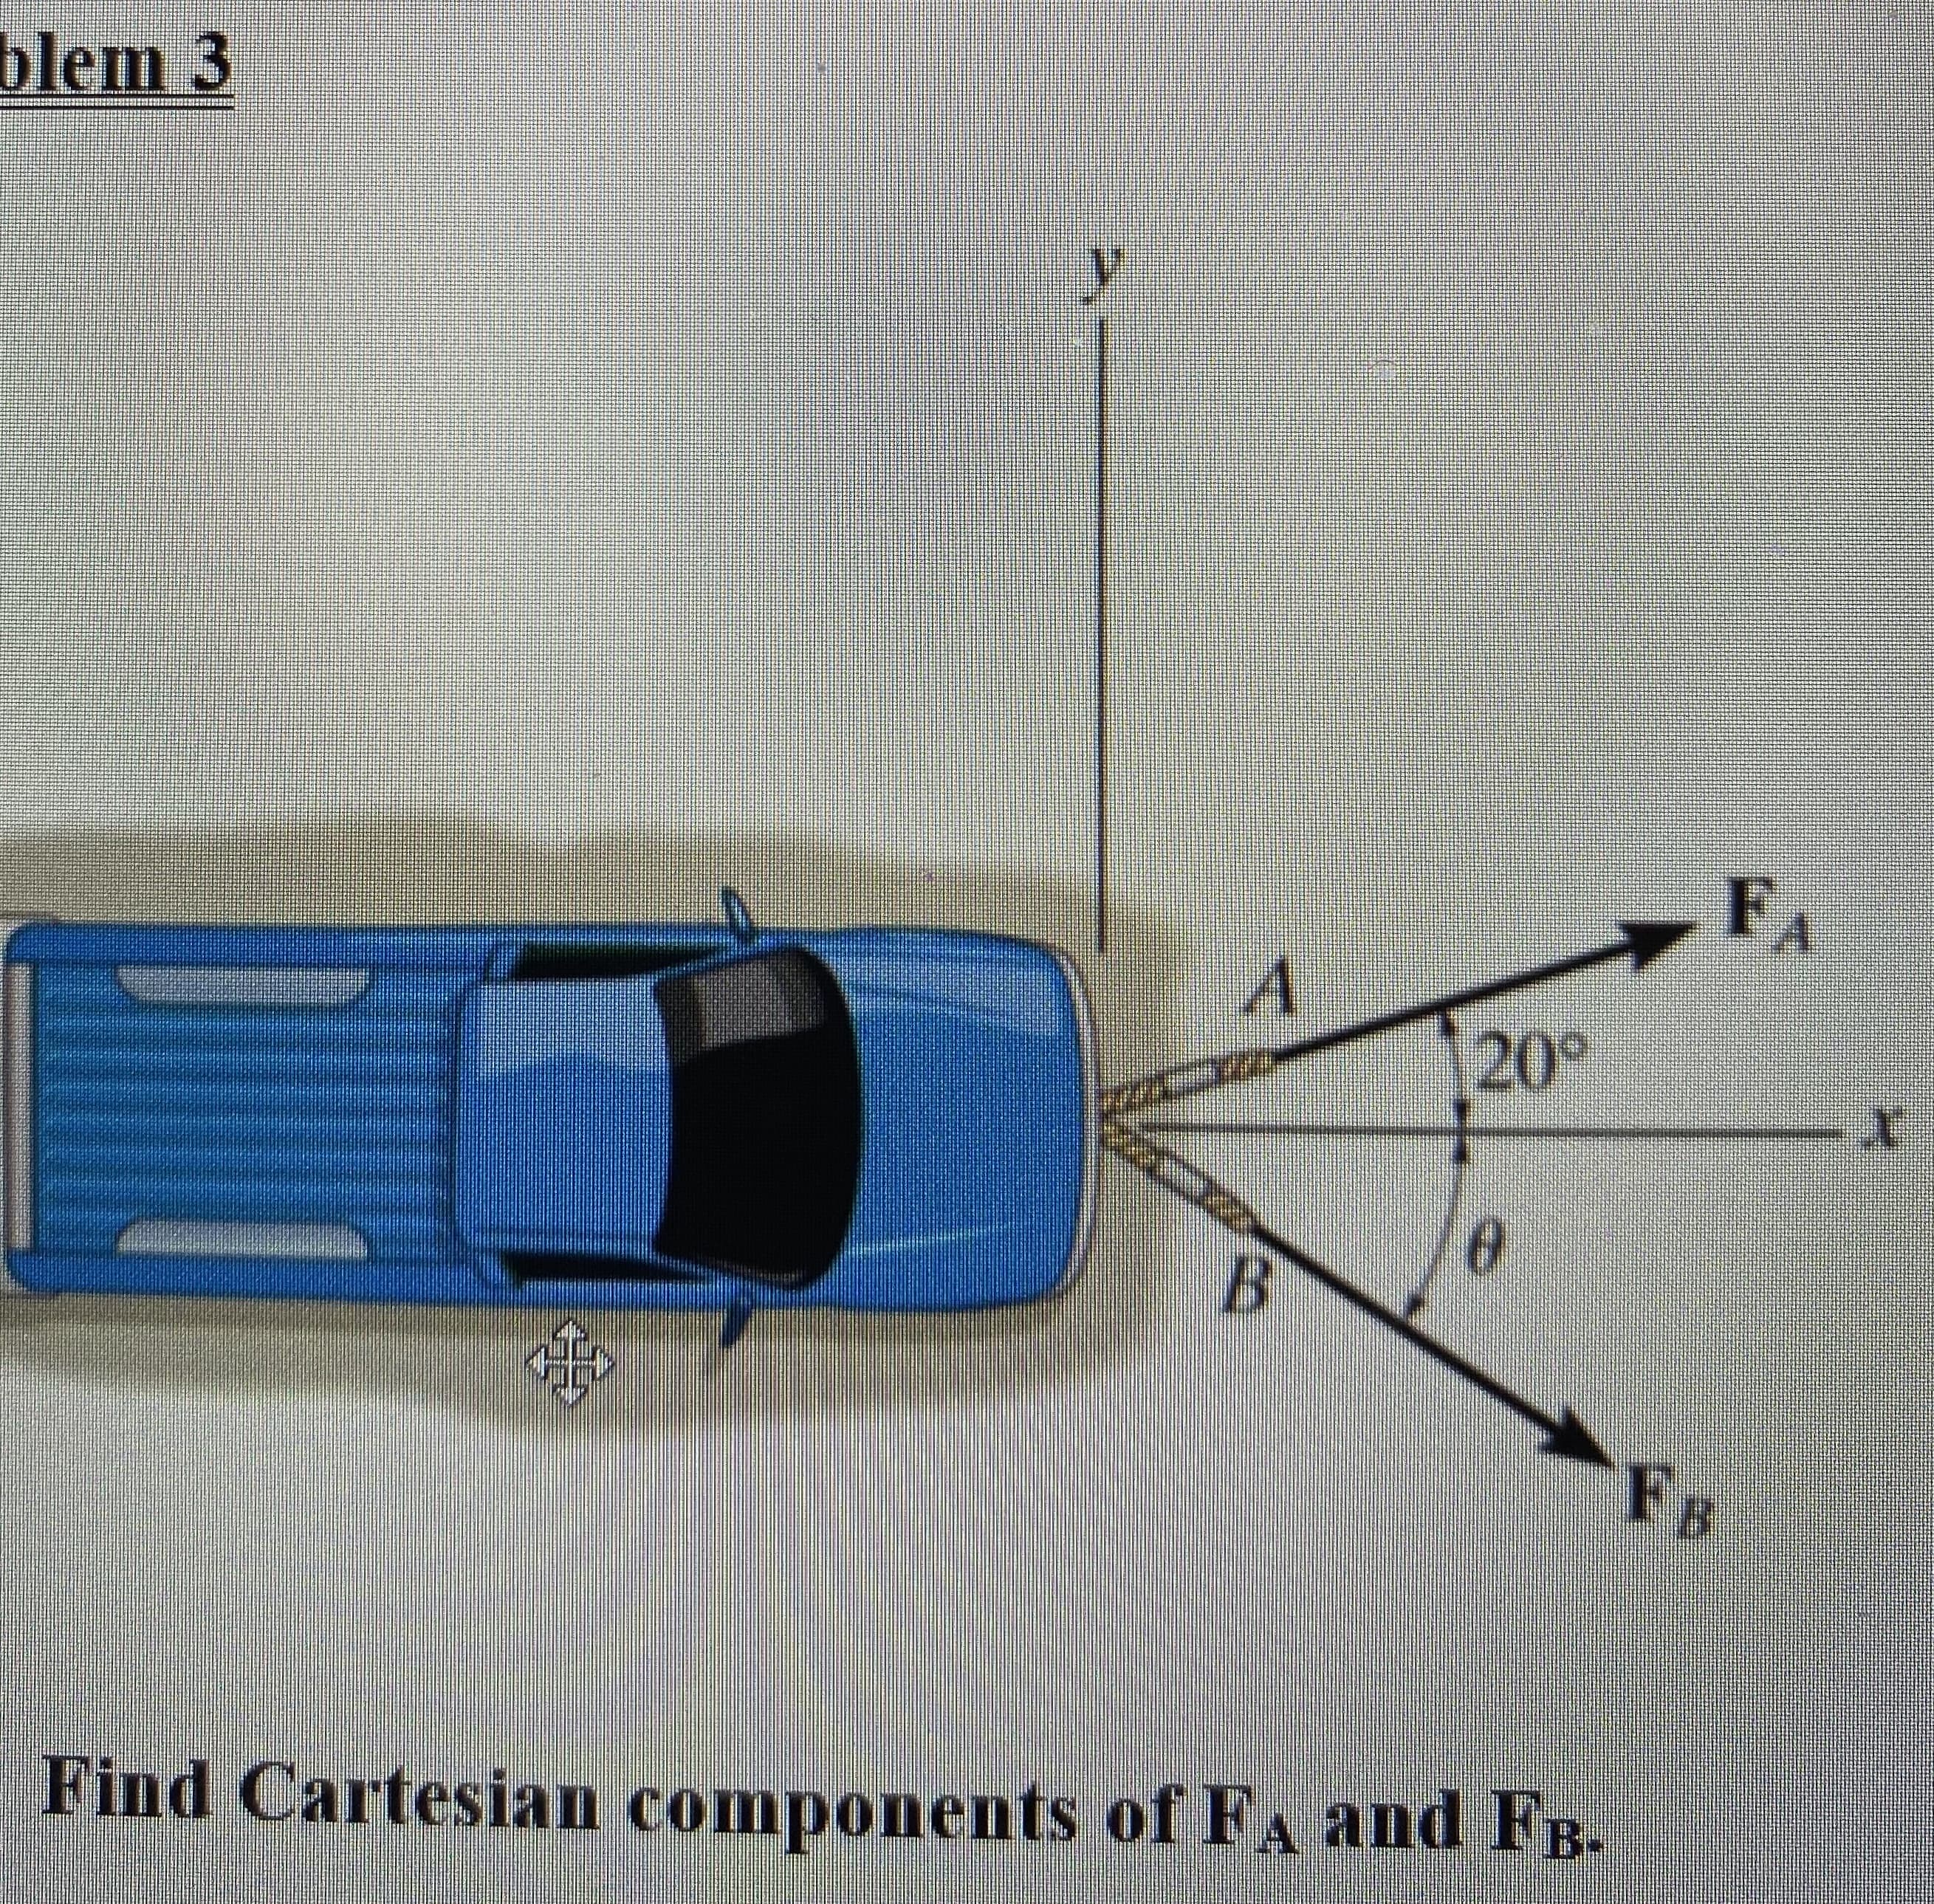 Find Cartesian components of FA and FB.
